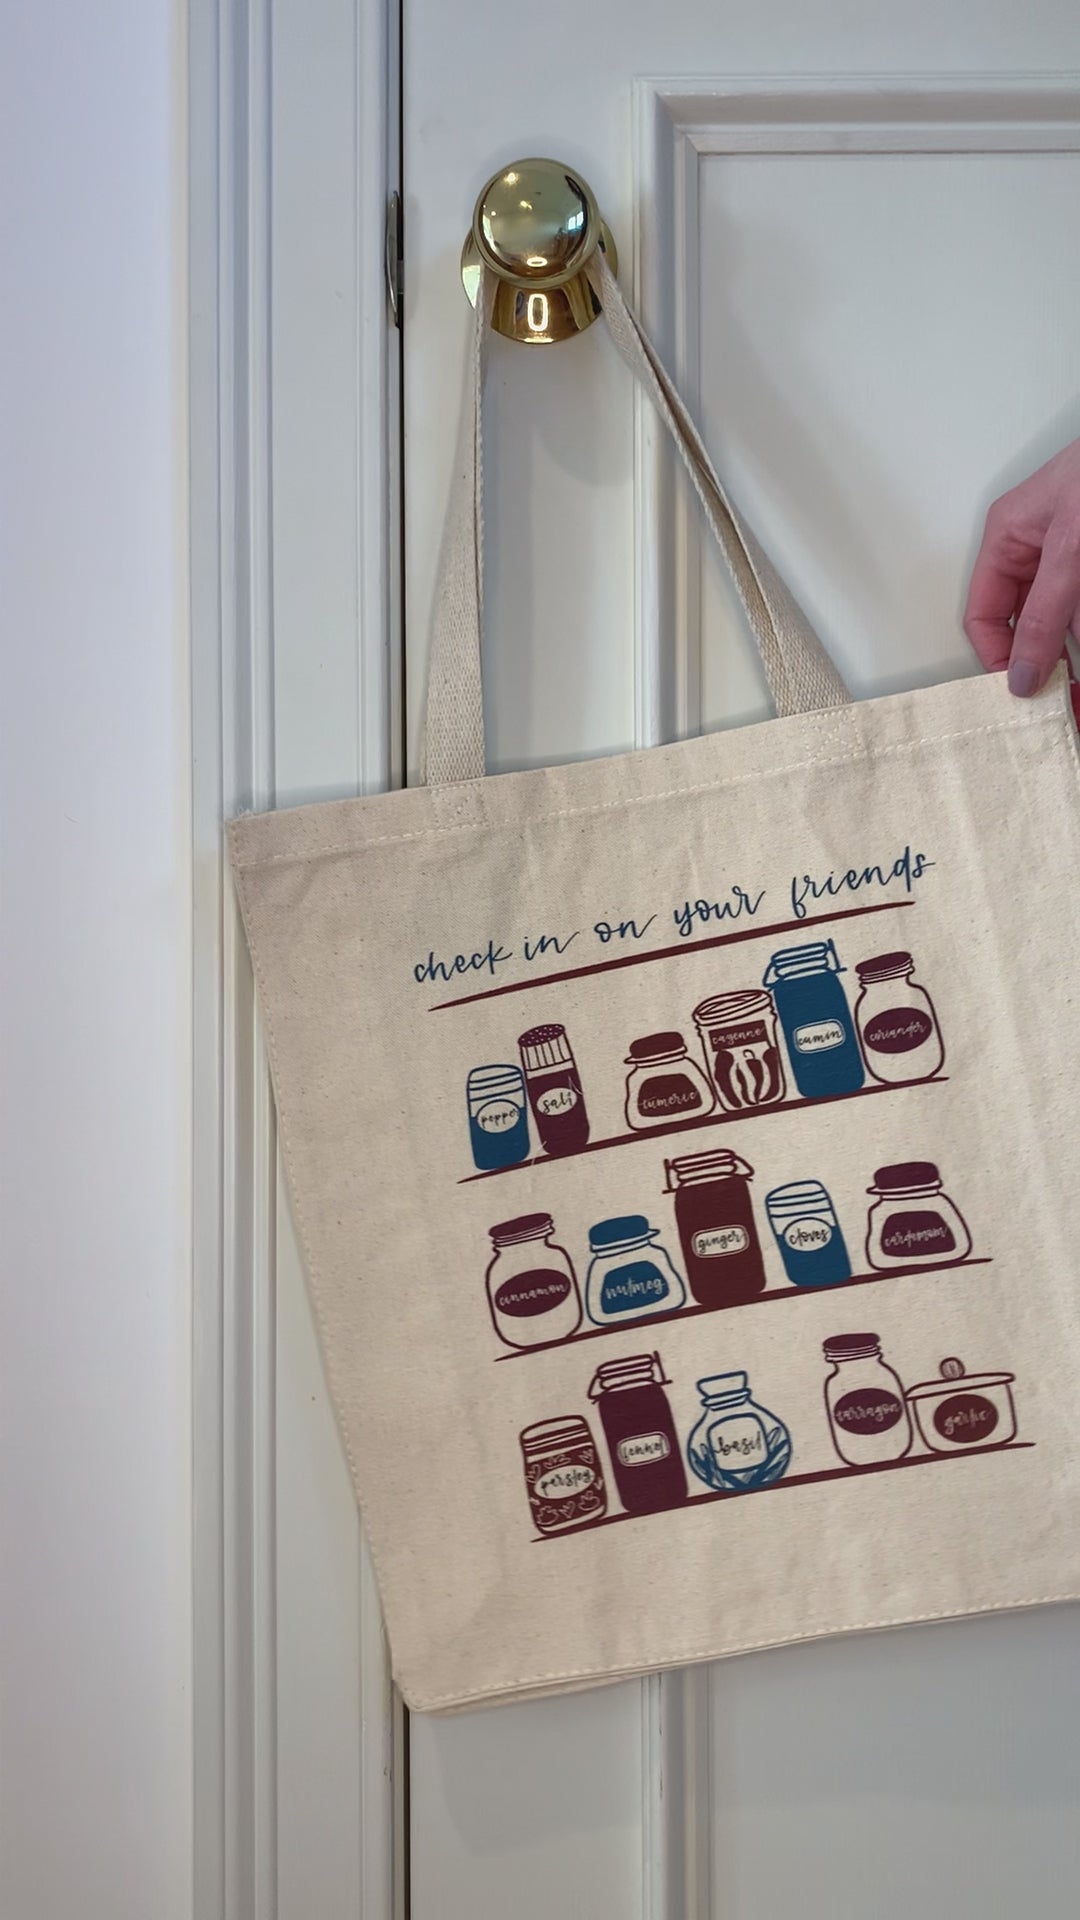 A canvas tote that reads "Check in on Your Friends" hangs from a doorknob